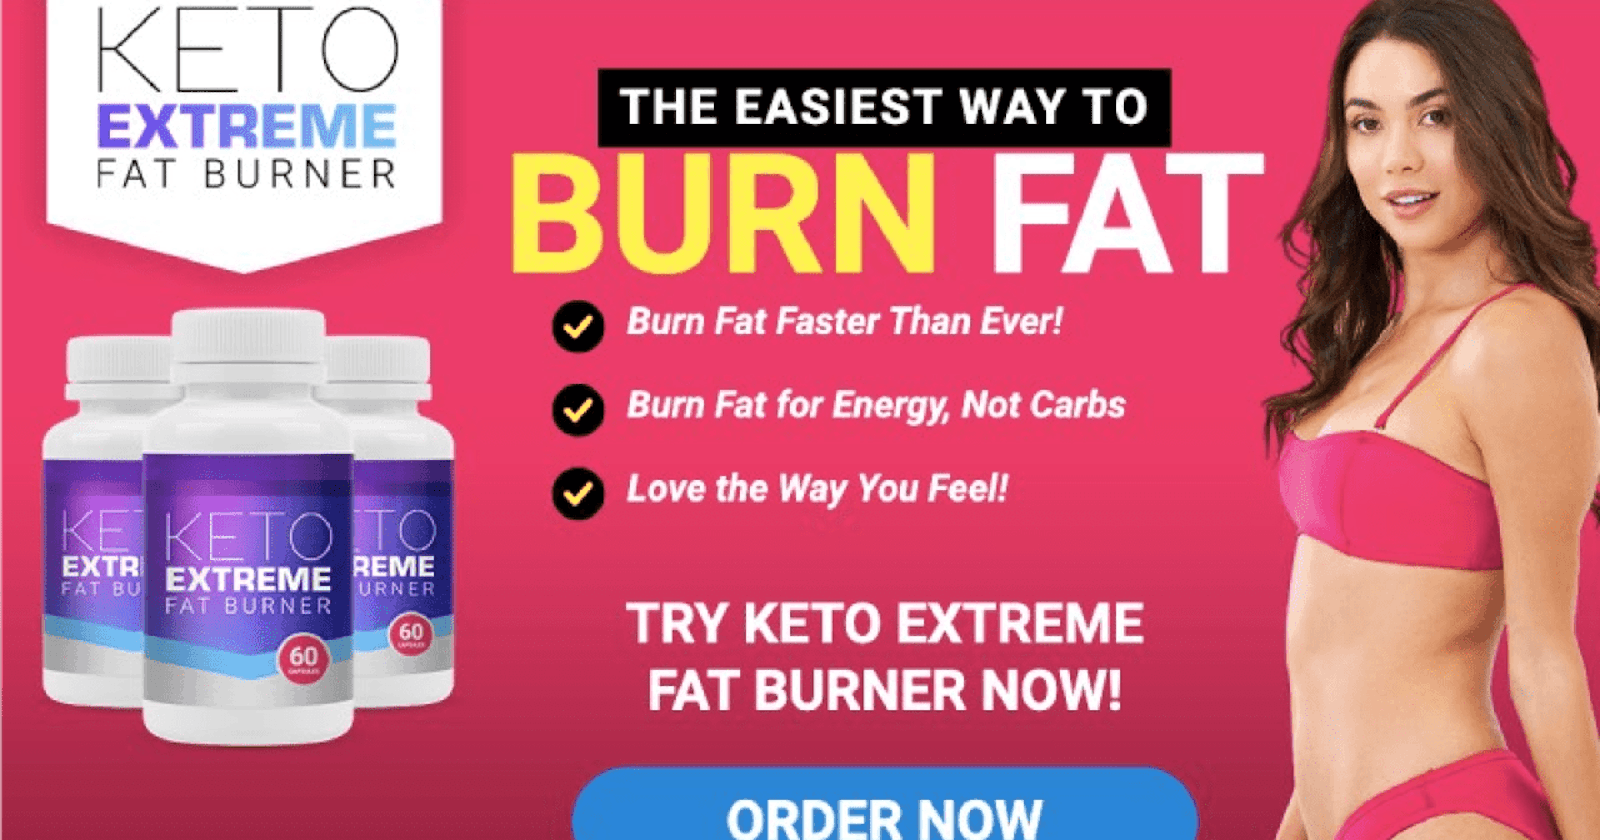 Keto Extreme Fat Burner Powerfull weightloss Formula is a Genuine Solution or Another Scam?